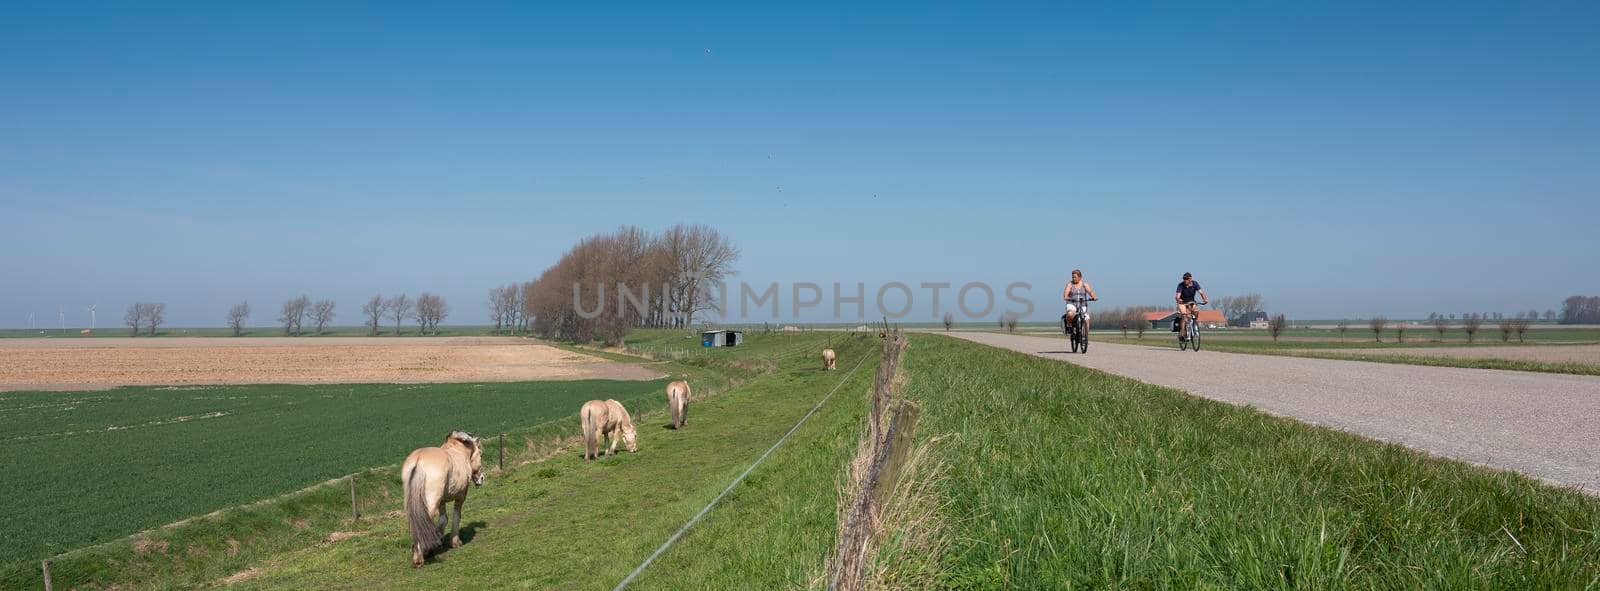 horses graze near country road with people on bicycle on island of noord beveland in dutch province of zeeland in the netherlands by ahavelaar